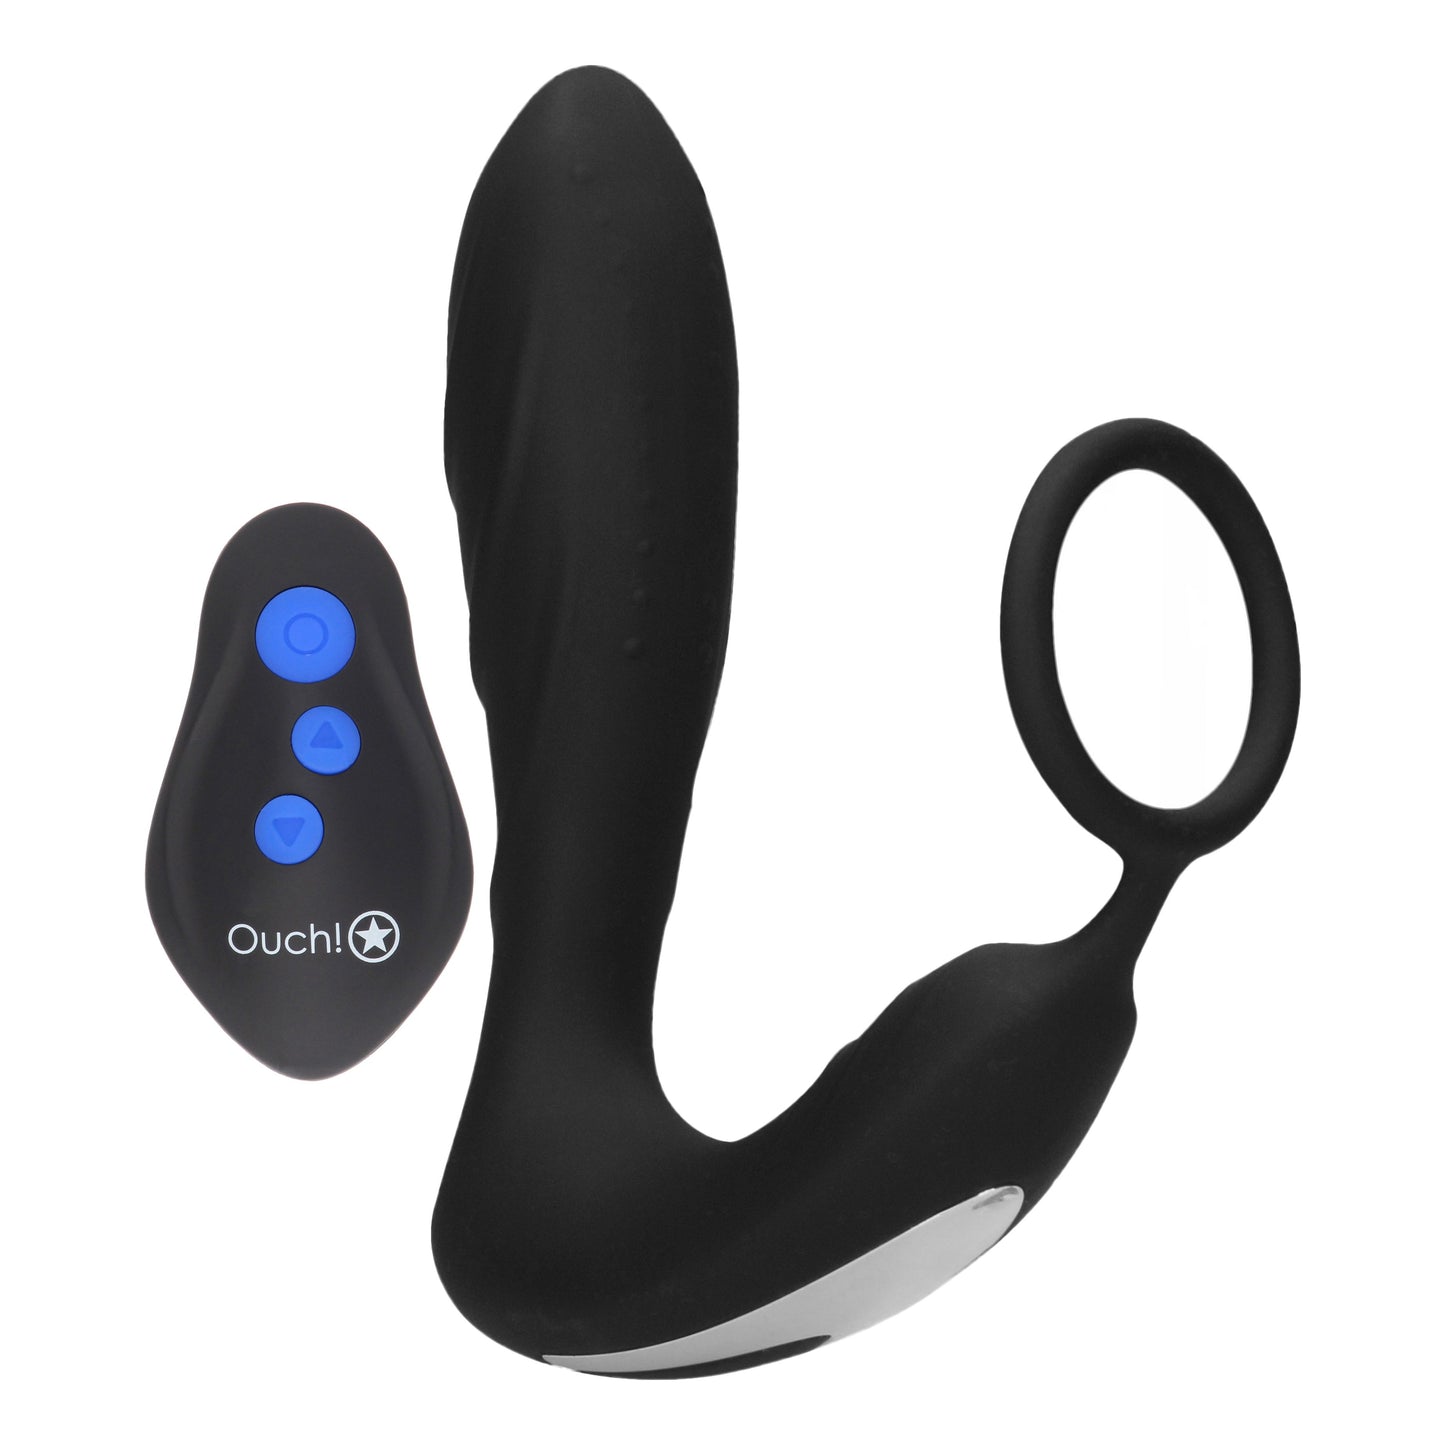 E-Stimulation and Vibration Butt Plug With Cock Ring and Wireless Remote Control - Black OU-OU580BLK